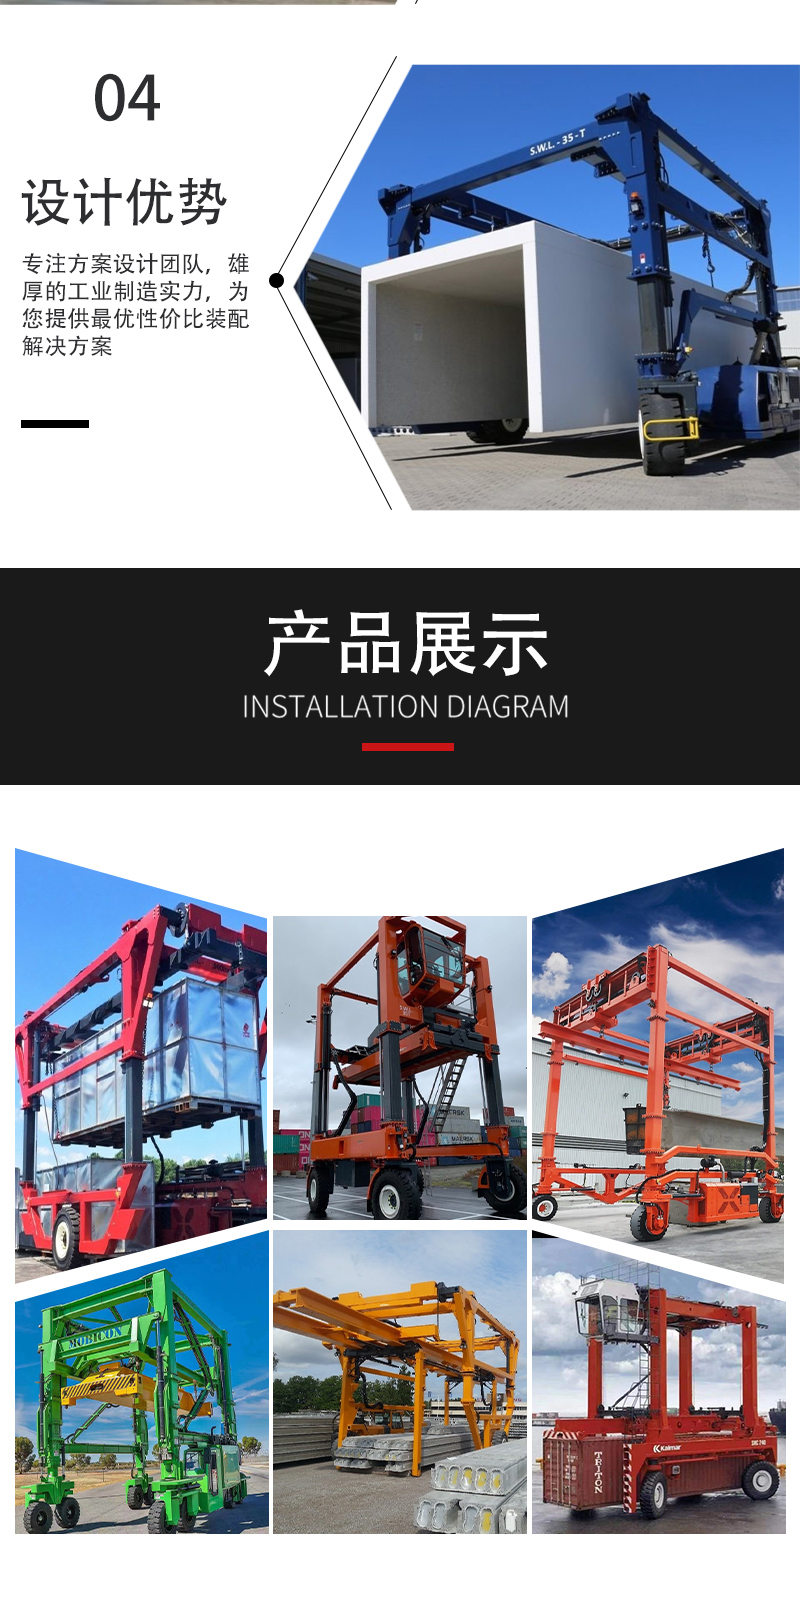 Energy storage box cross transport machine Container lifting and flipping integrated machine Shipyard lifting